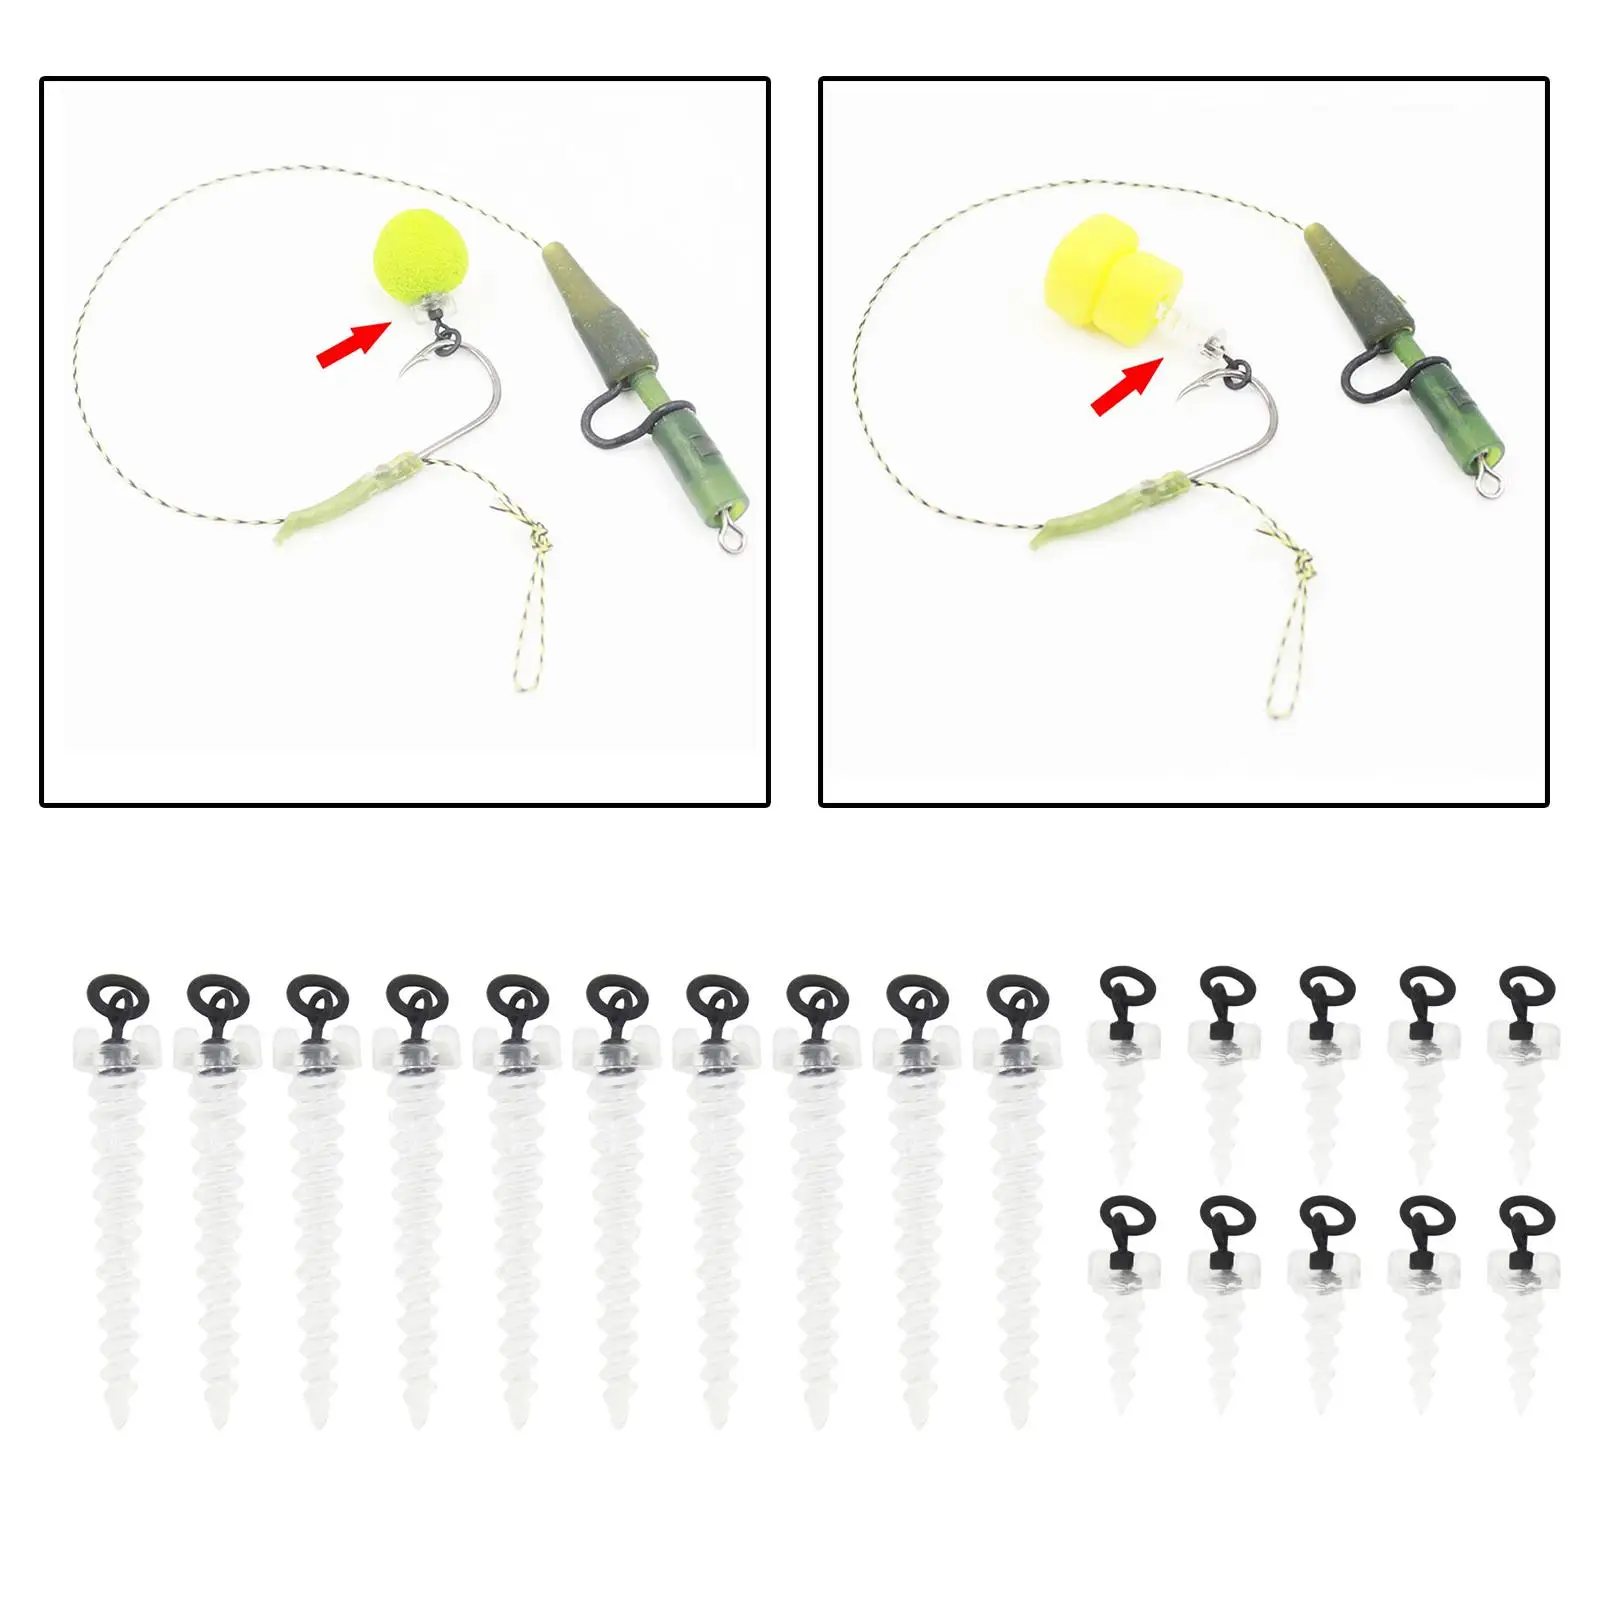 10Pcs Plastic Carp Boilie Bait Screw with Round Link Loop Swivels Fishing Gear Rig for Carp Fishing Grains Soft Baits Hook Stop